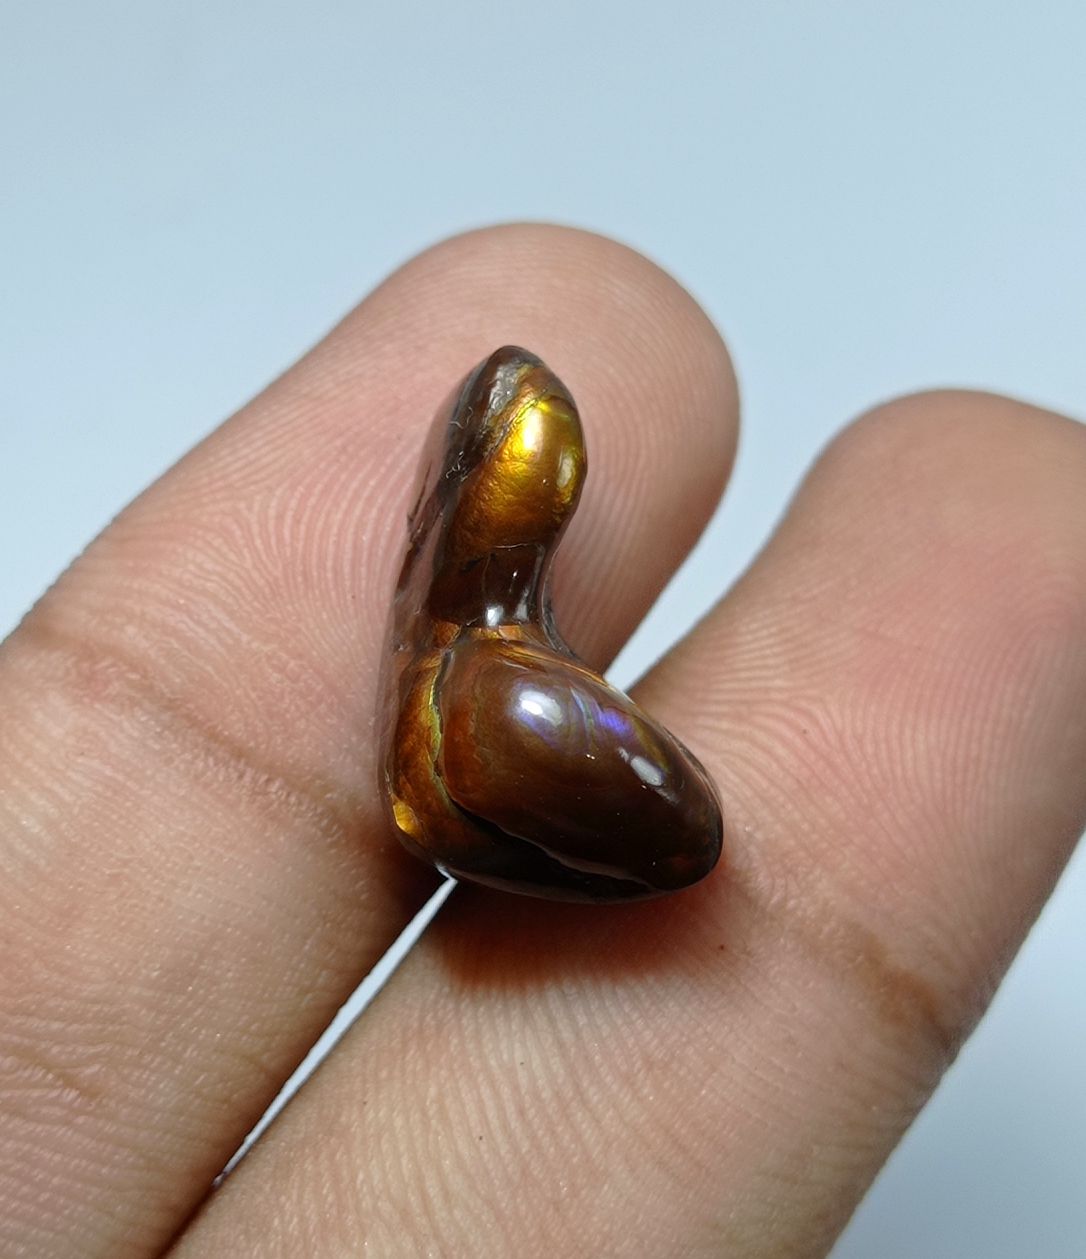 13.1ct L Shaped Natural Carved Rare Fire Agate - Dimensions 19x13x10mm